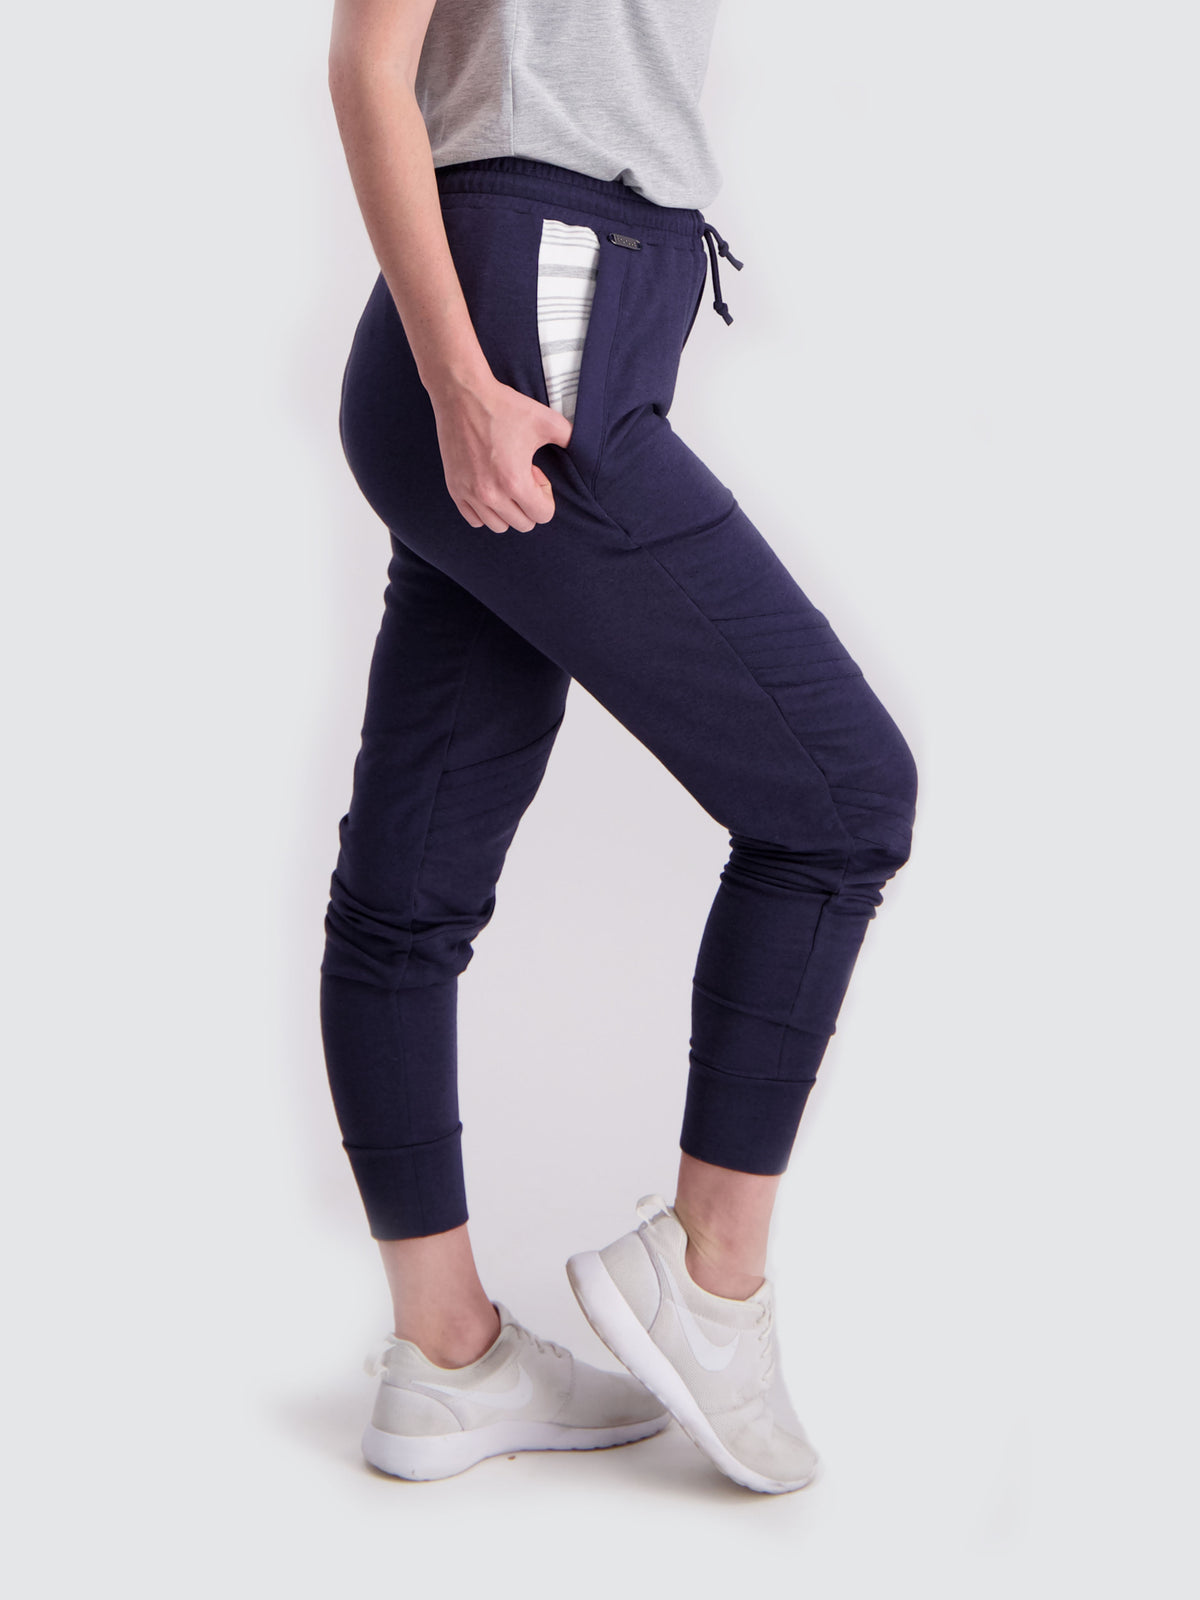 Two Blind Brothers - Womens Women's Impractical Jogger Navy